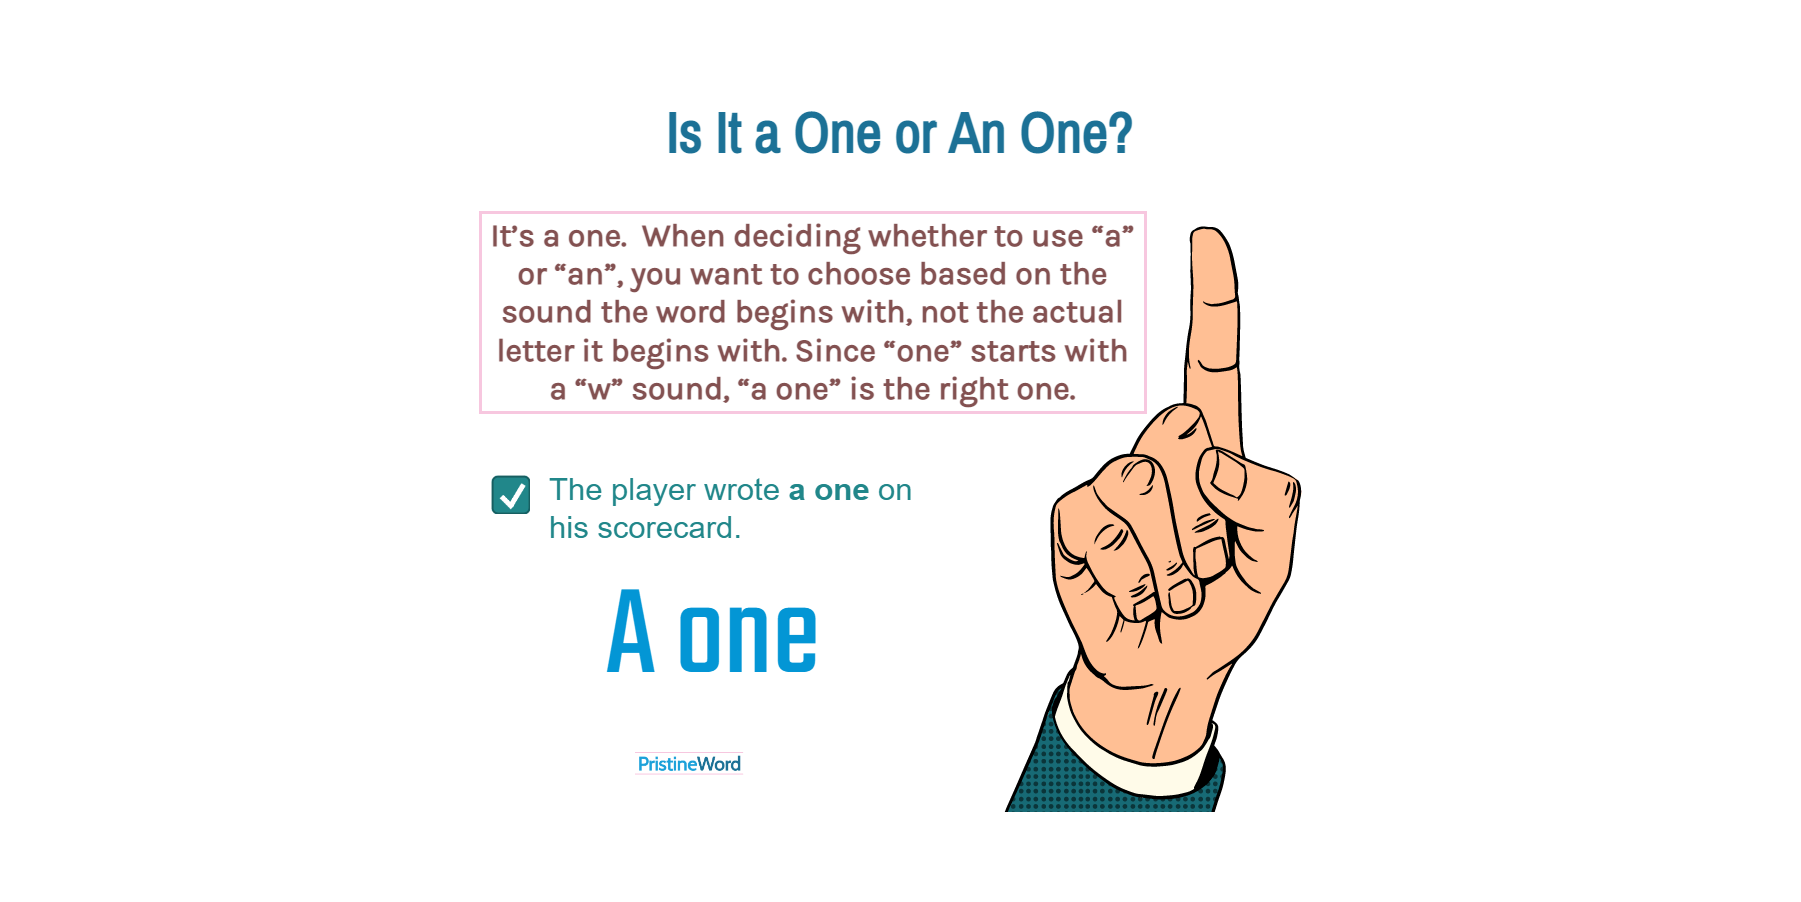 Is It ‘a One’ or ‘an One’?